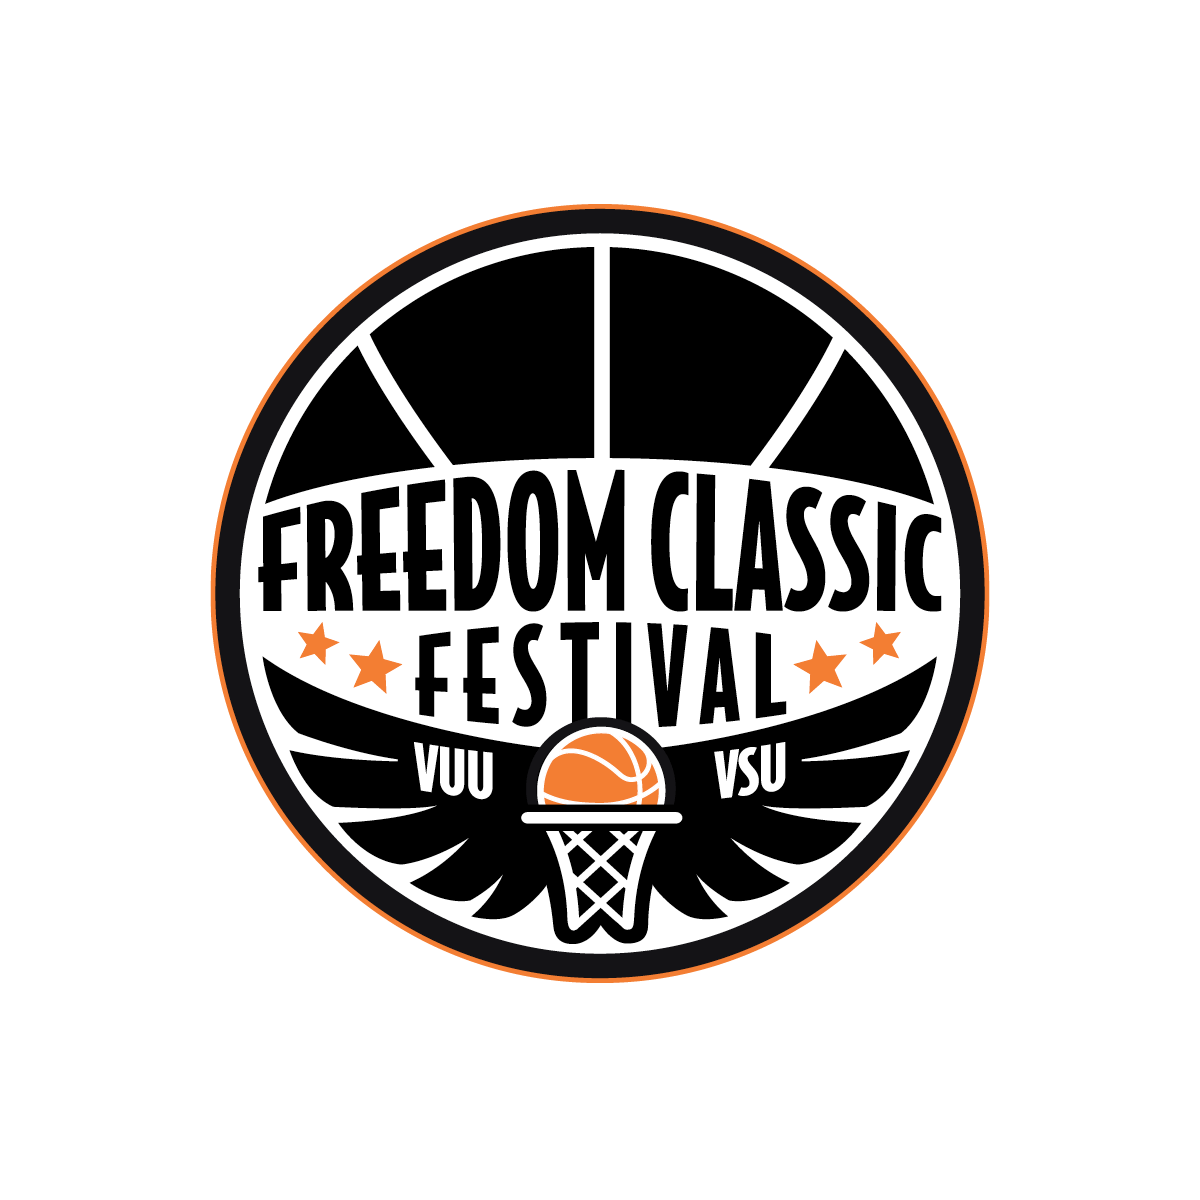 Vuu Logo - Official Page For The 2019 Freedom Classic Festival, Jaunuary 19th